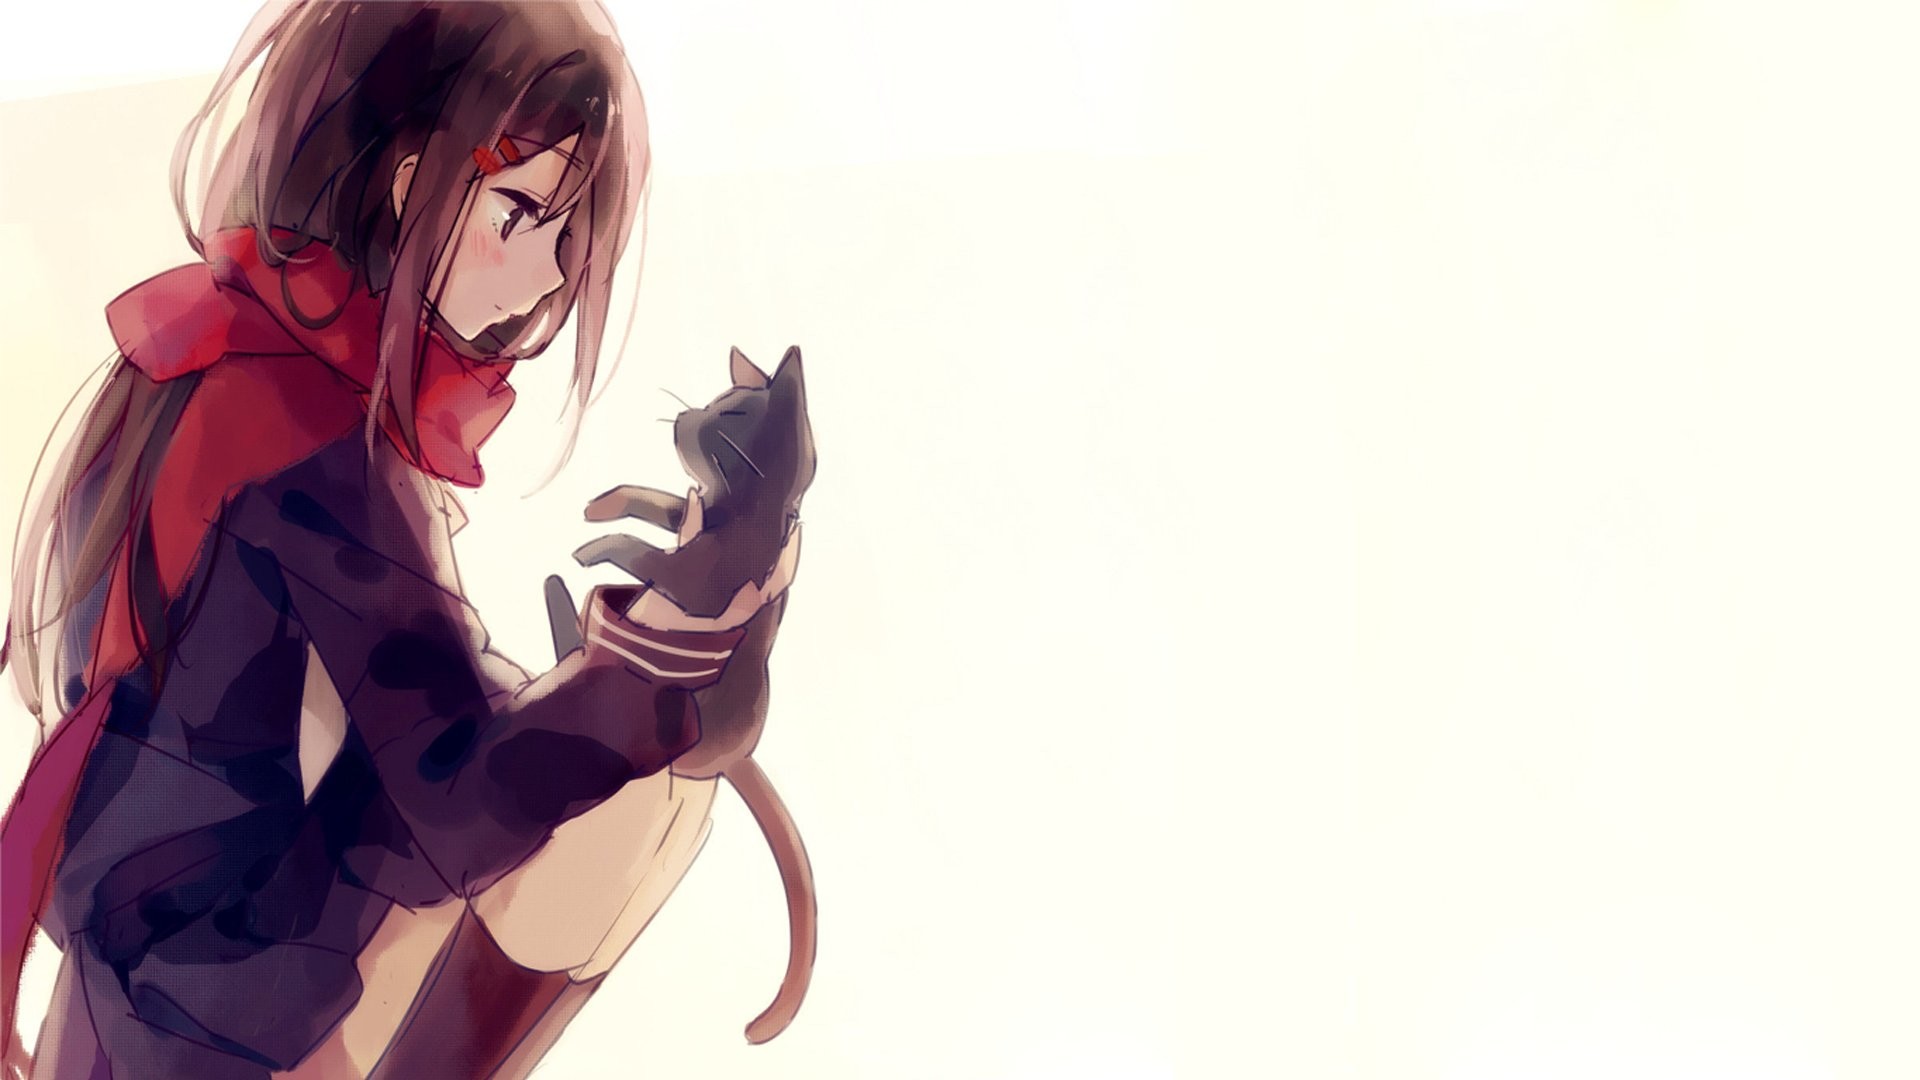 1920x1080 Anime Cat Girl Wallpapers (34 Wallpapers)